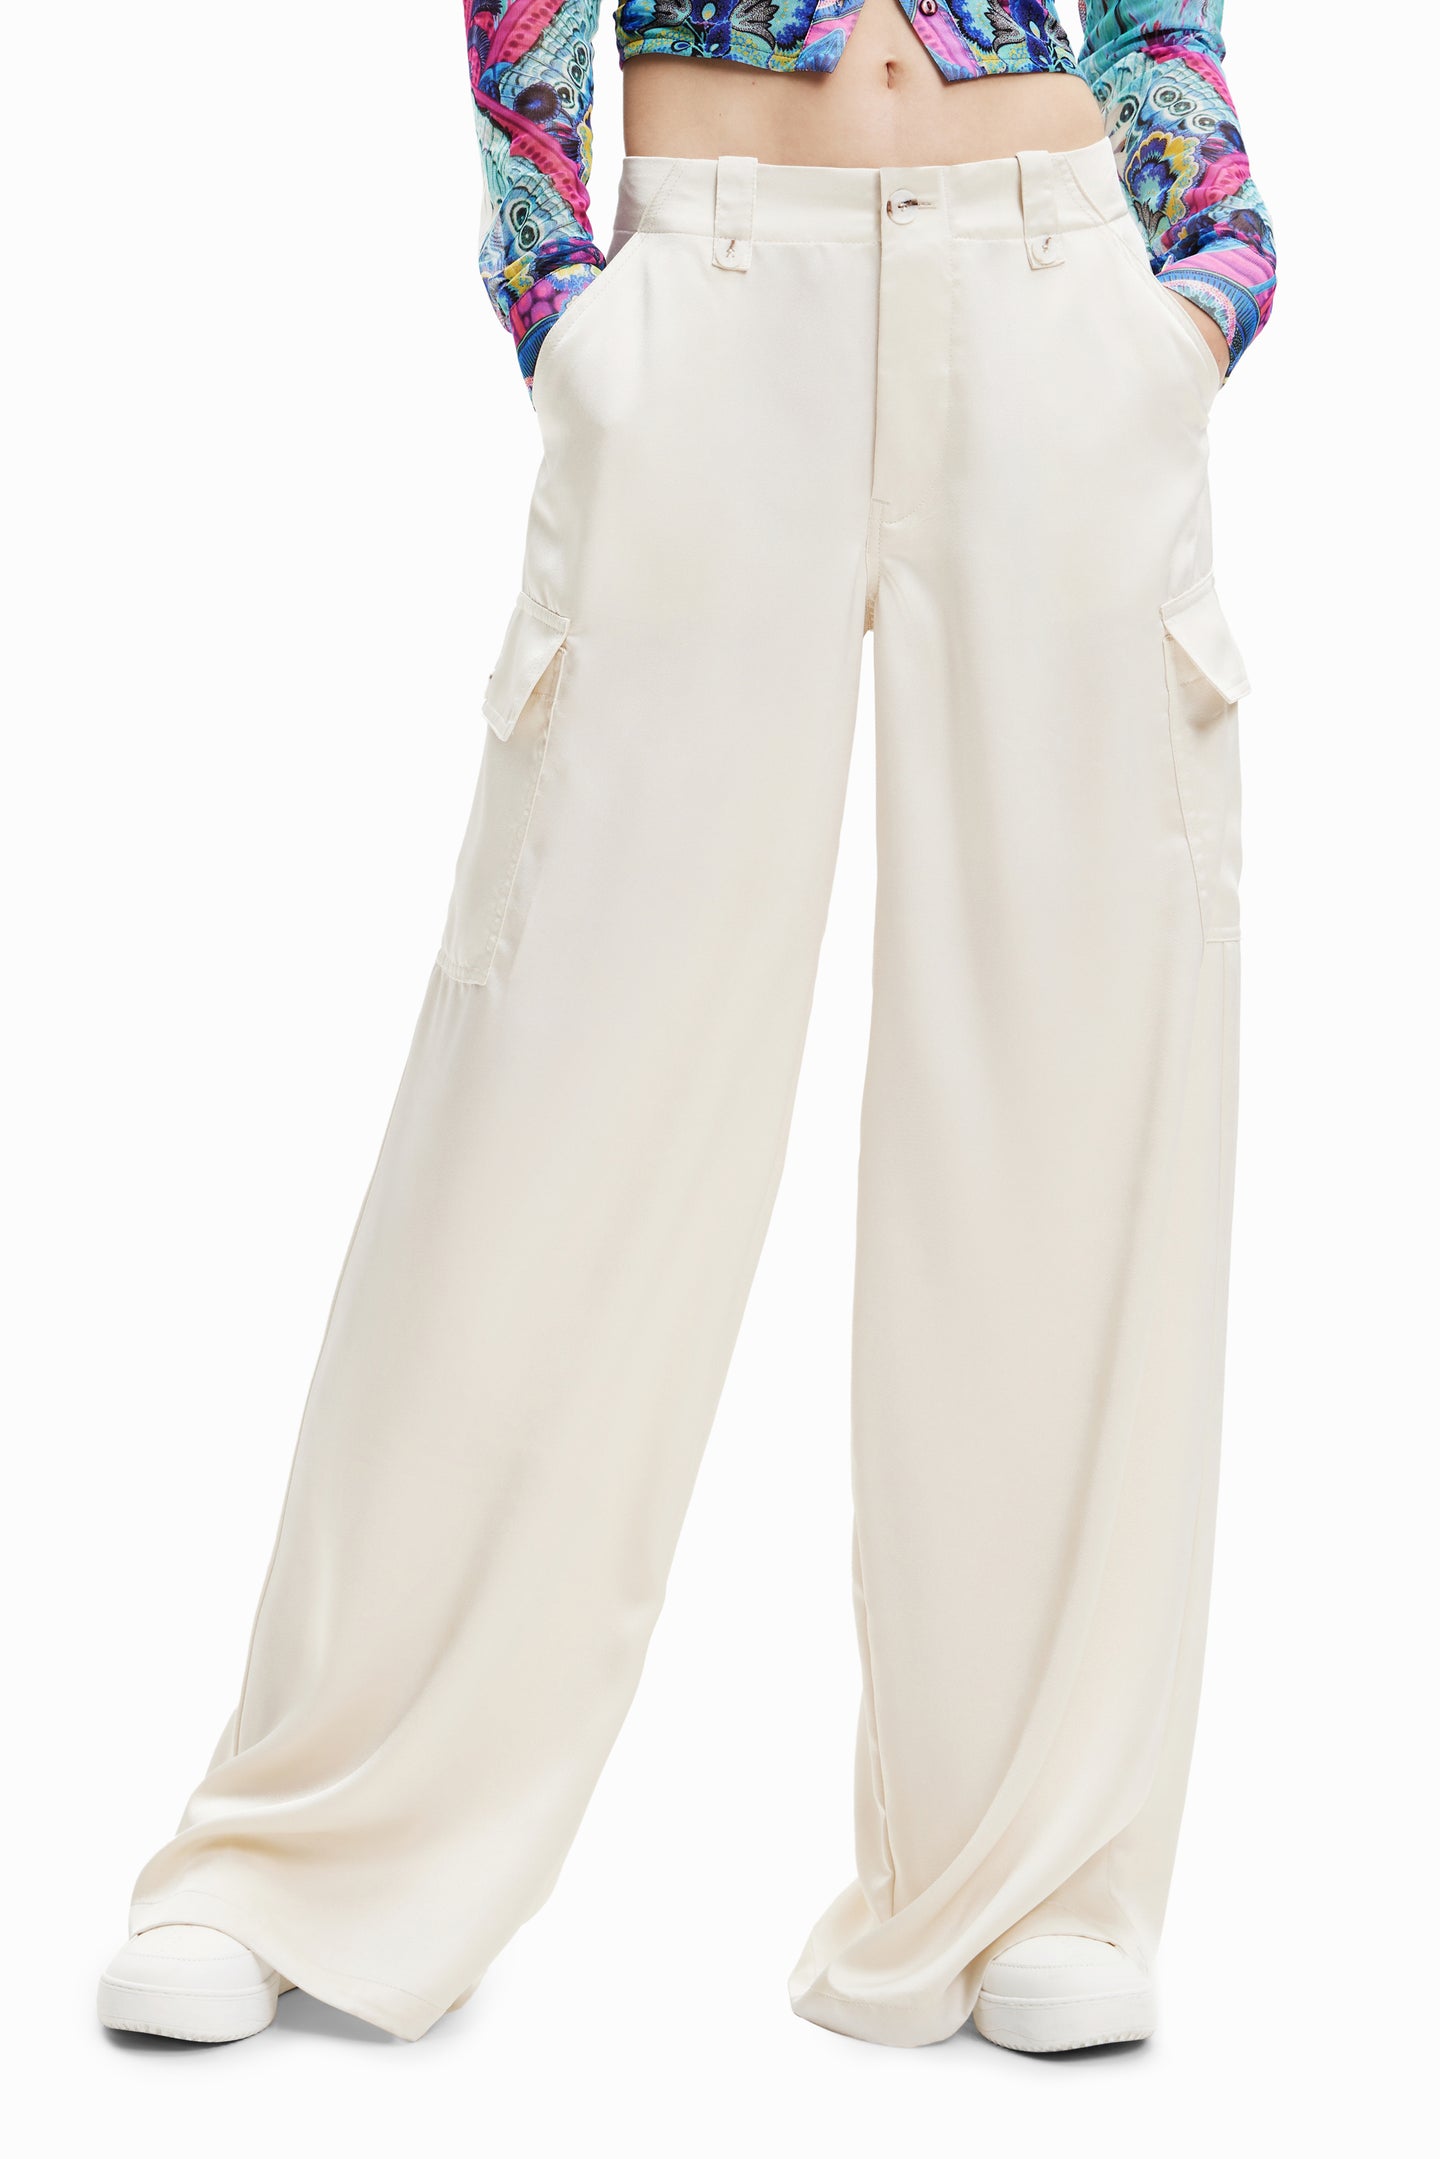 Desigual Long Woven Trousers - Above The Crowd Boutique